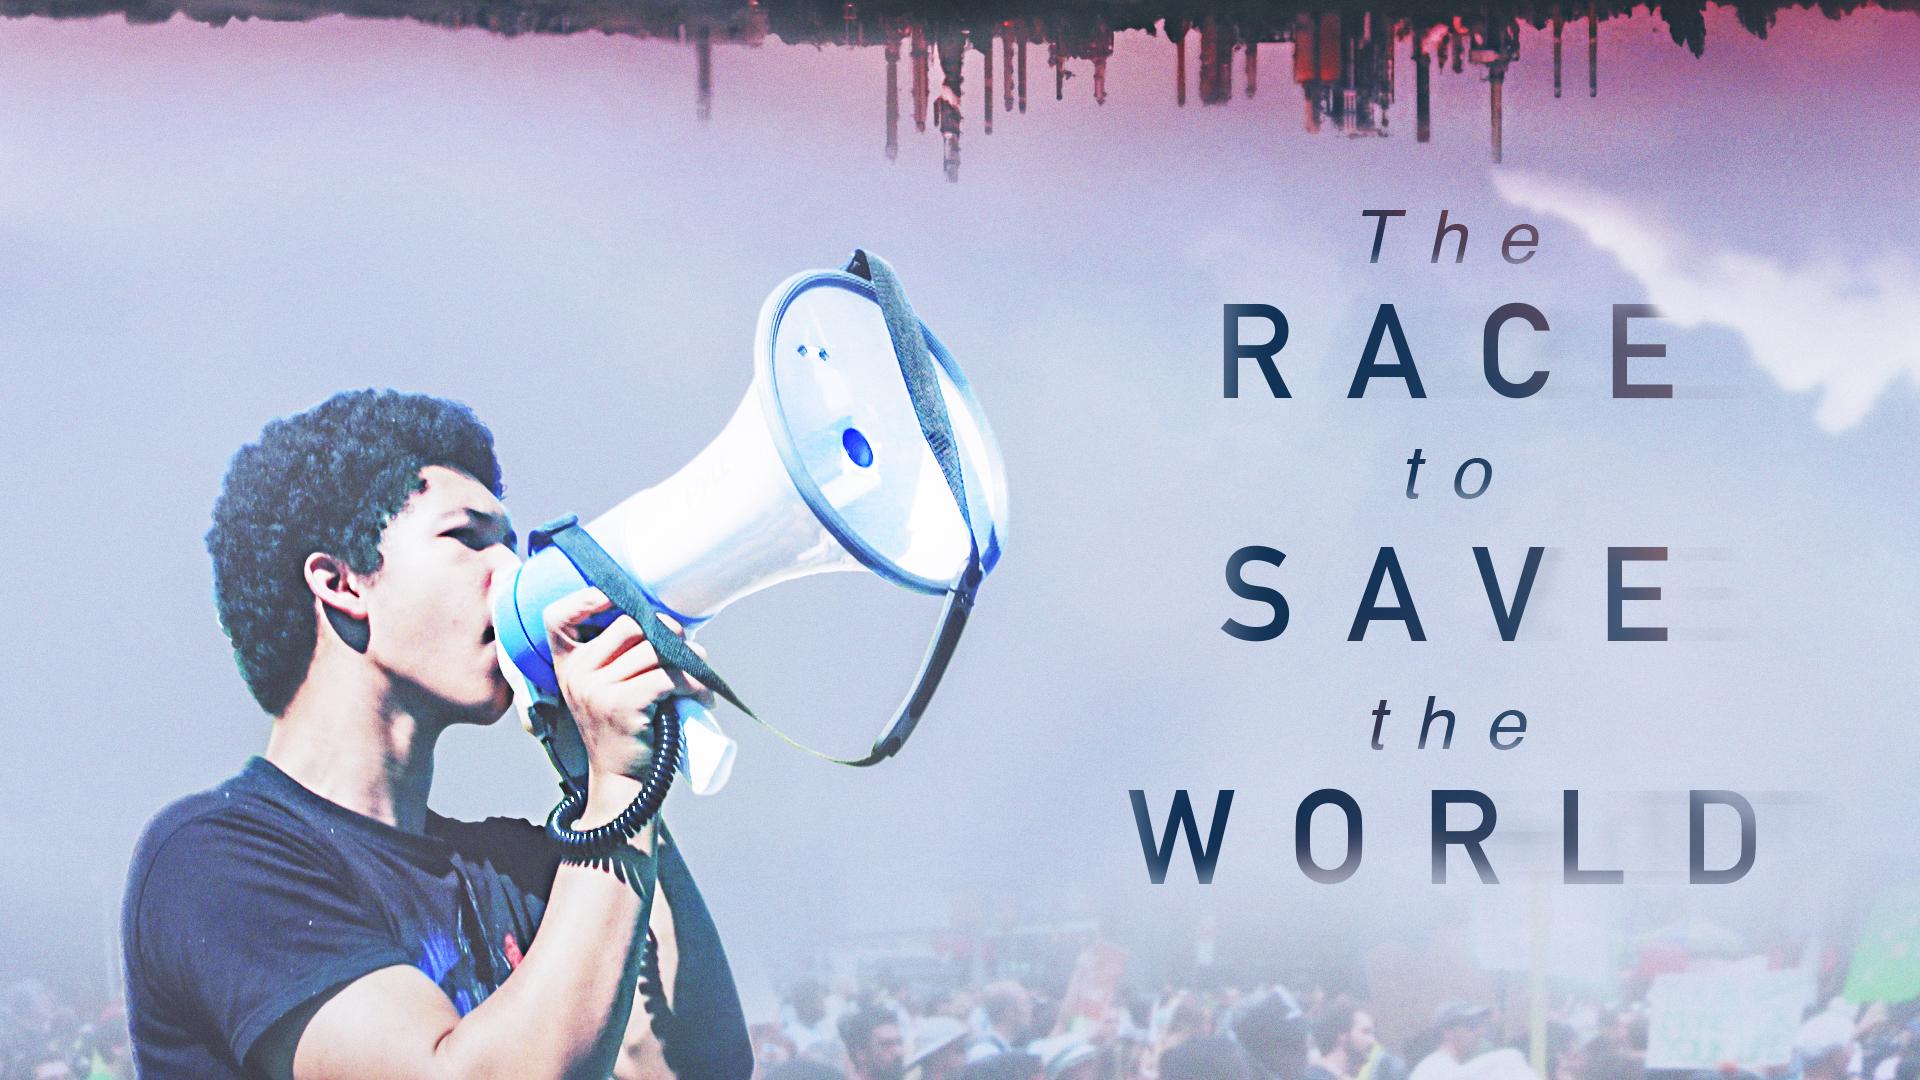 •THE RACE TO SAVE THE WORLD•